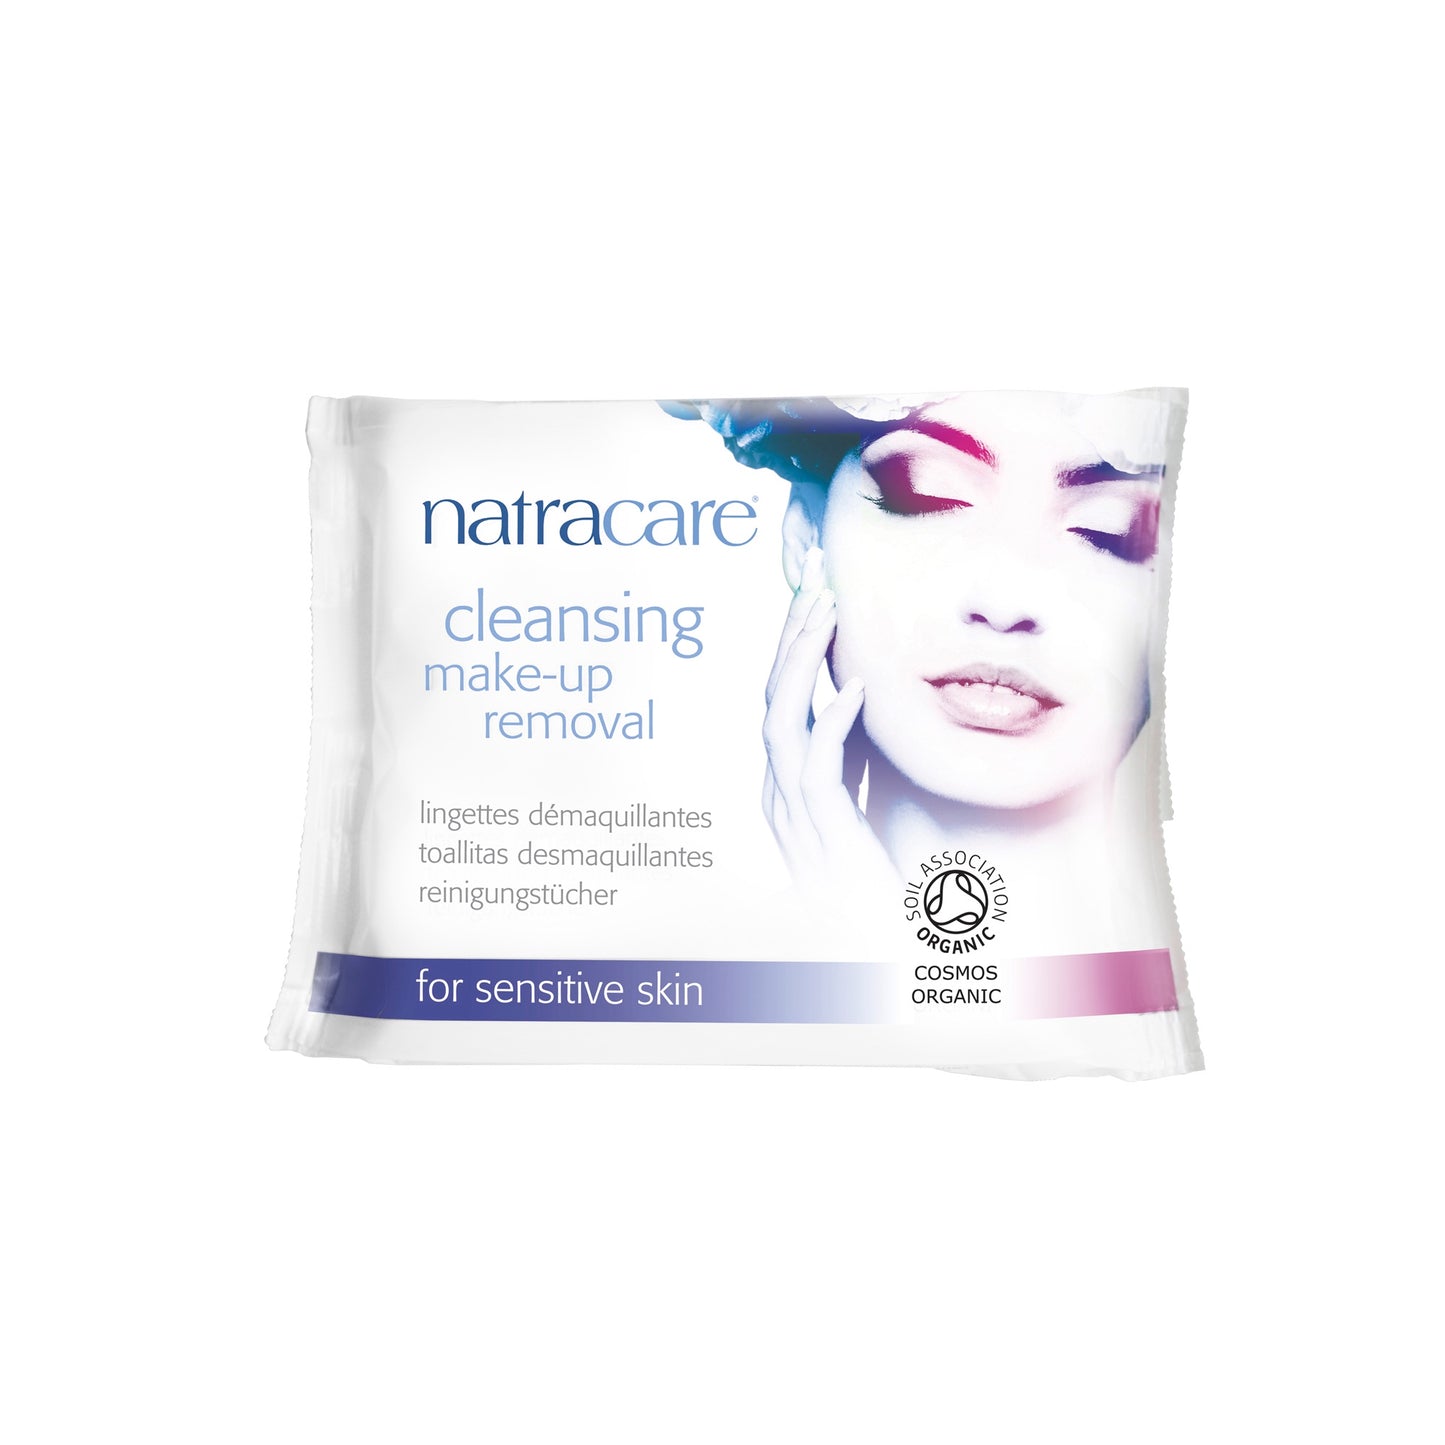 Natracare Organic Cleansing Makeup Remover Wipes MADE SAFE